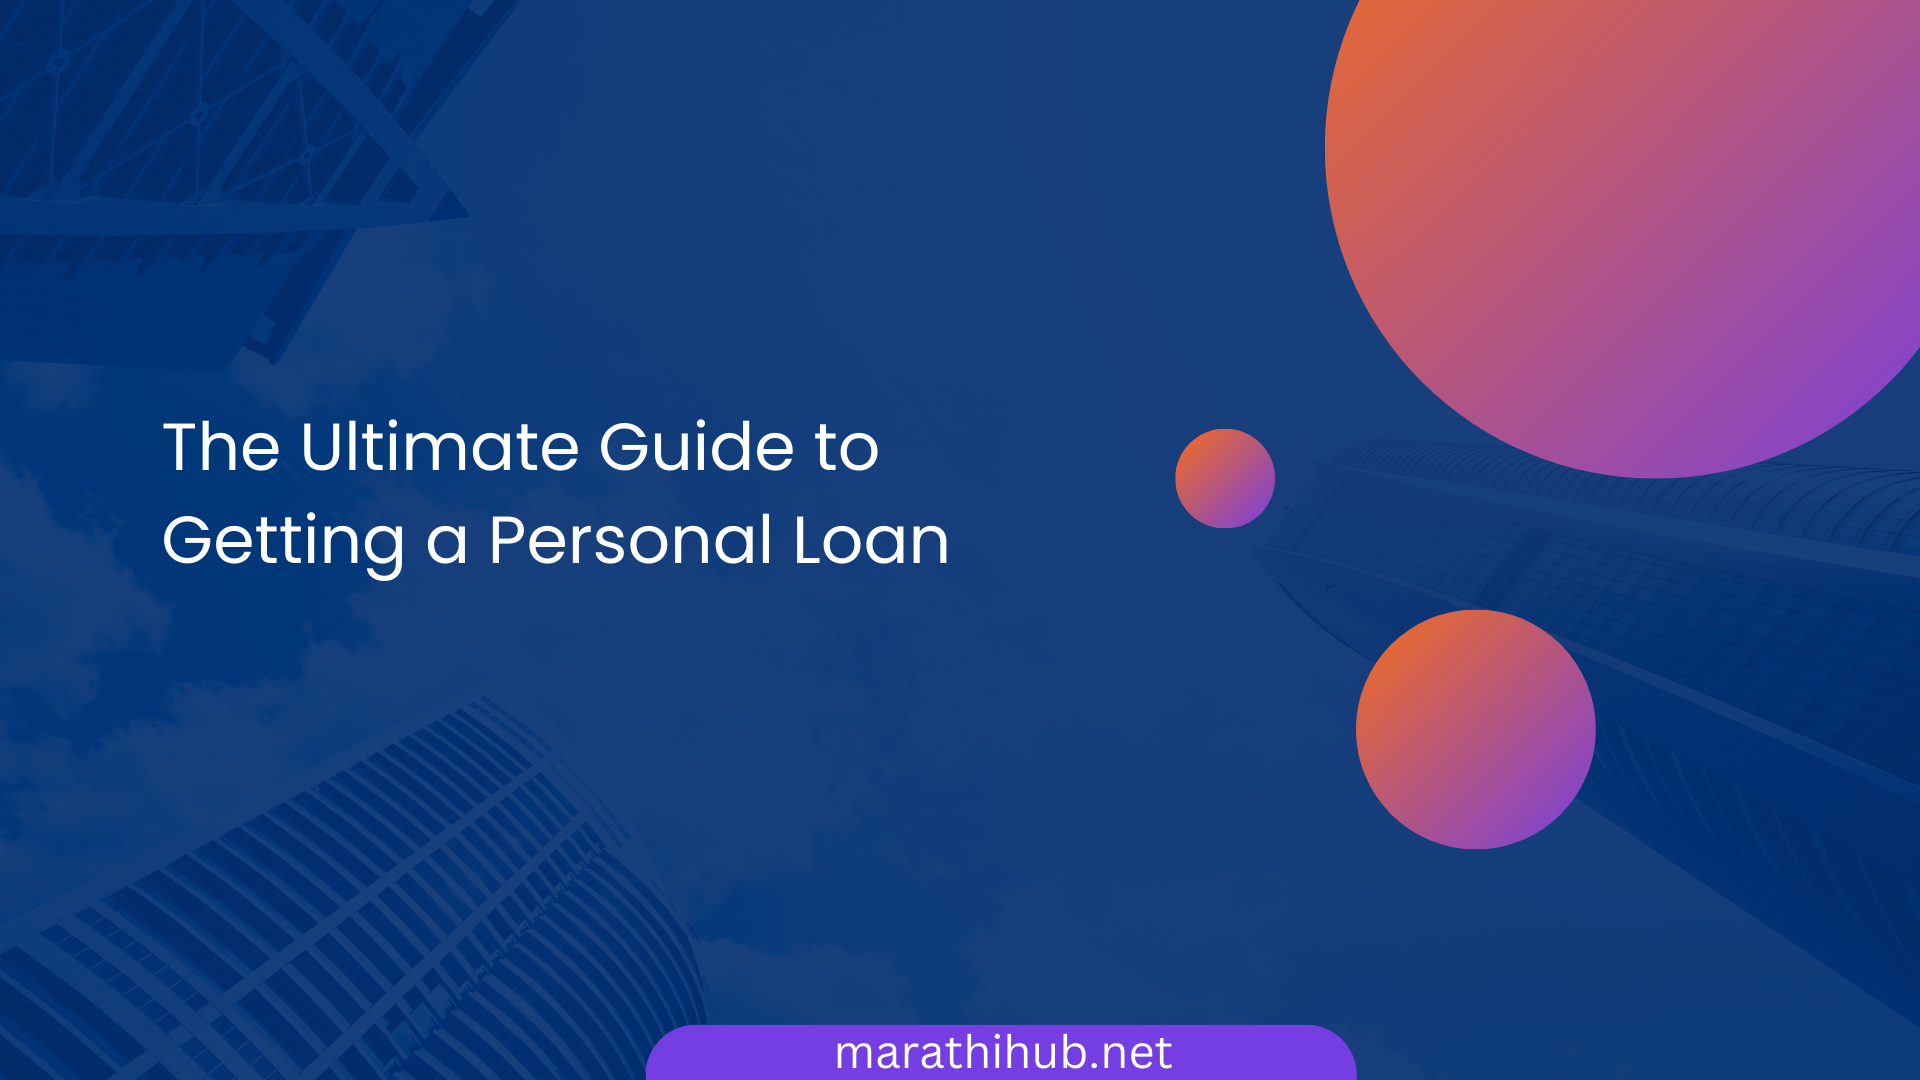 The Ultimate Guide to Getting a Personal Loan